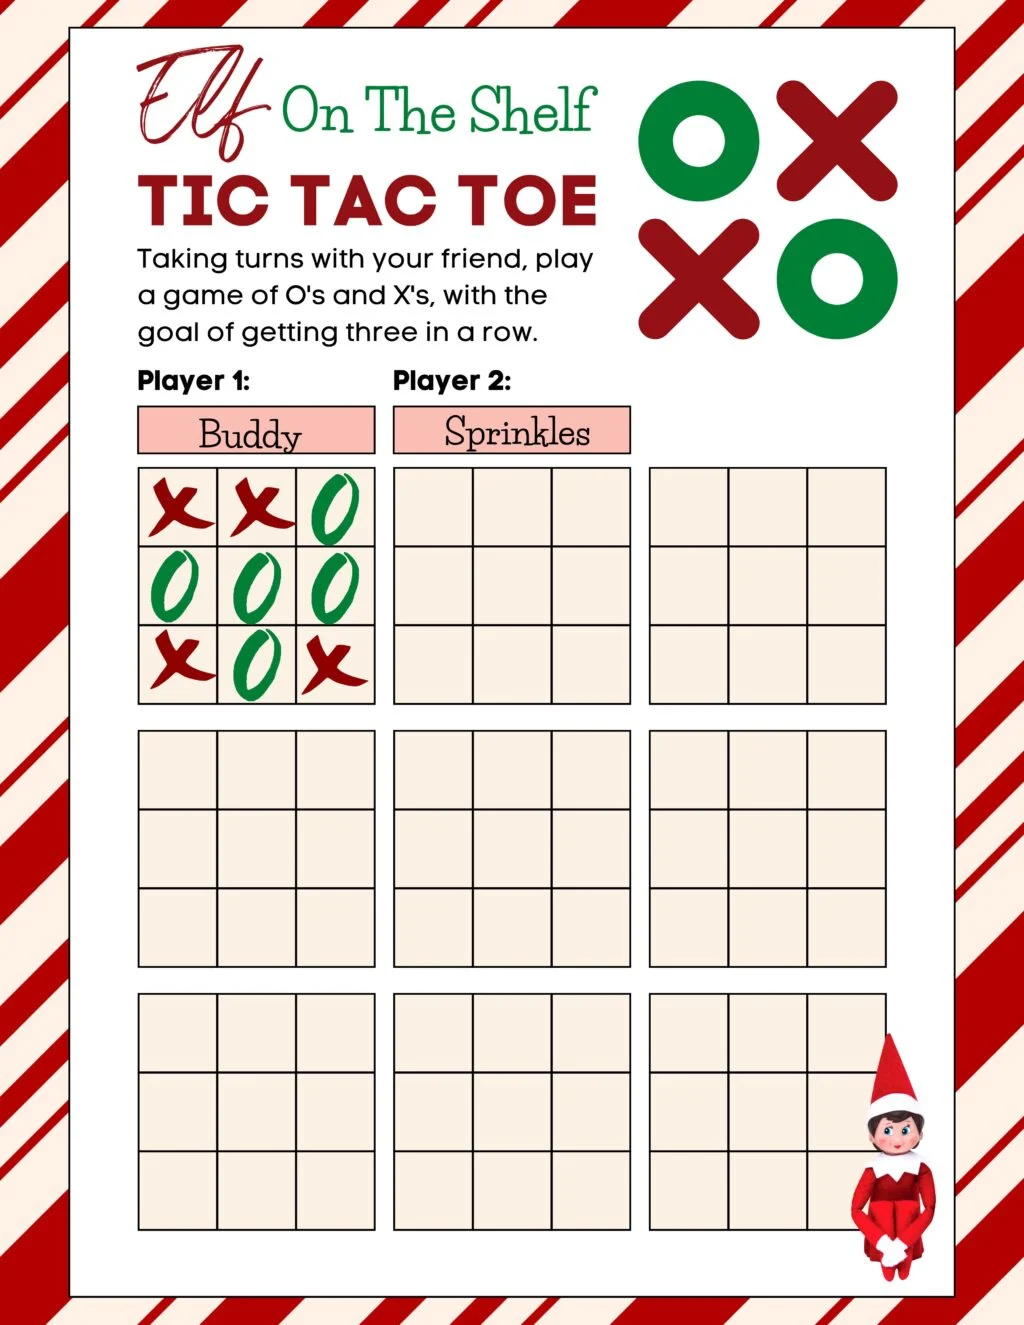 example image of how to play elf on the shelf tic tac toe